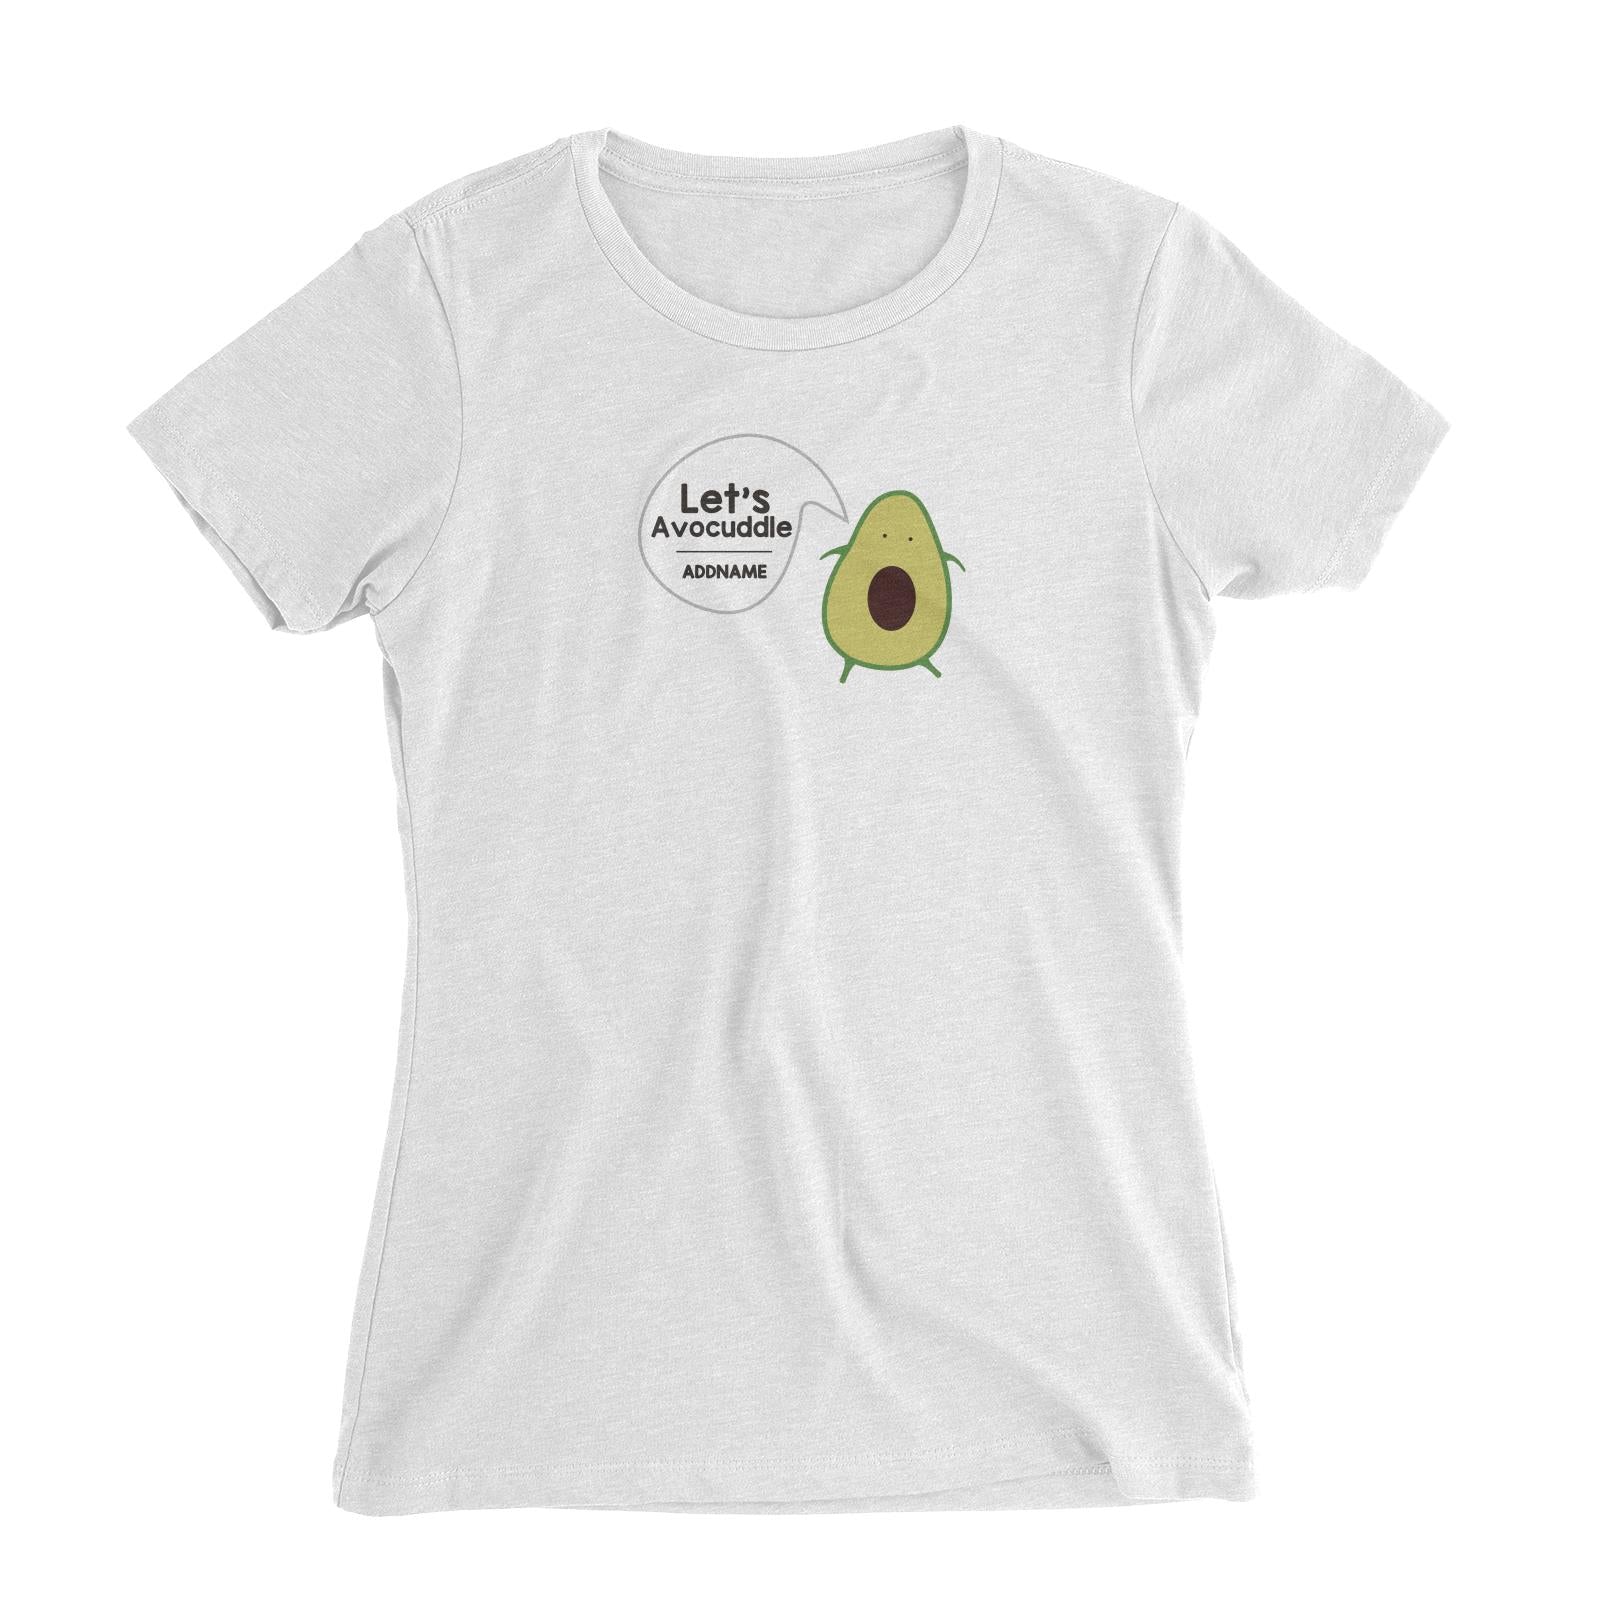 Couple Series Let's Avocuddle With Seed Addname Women Slim Fit T-Shirt